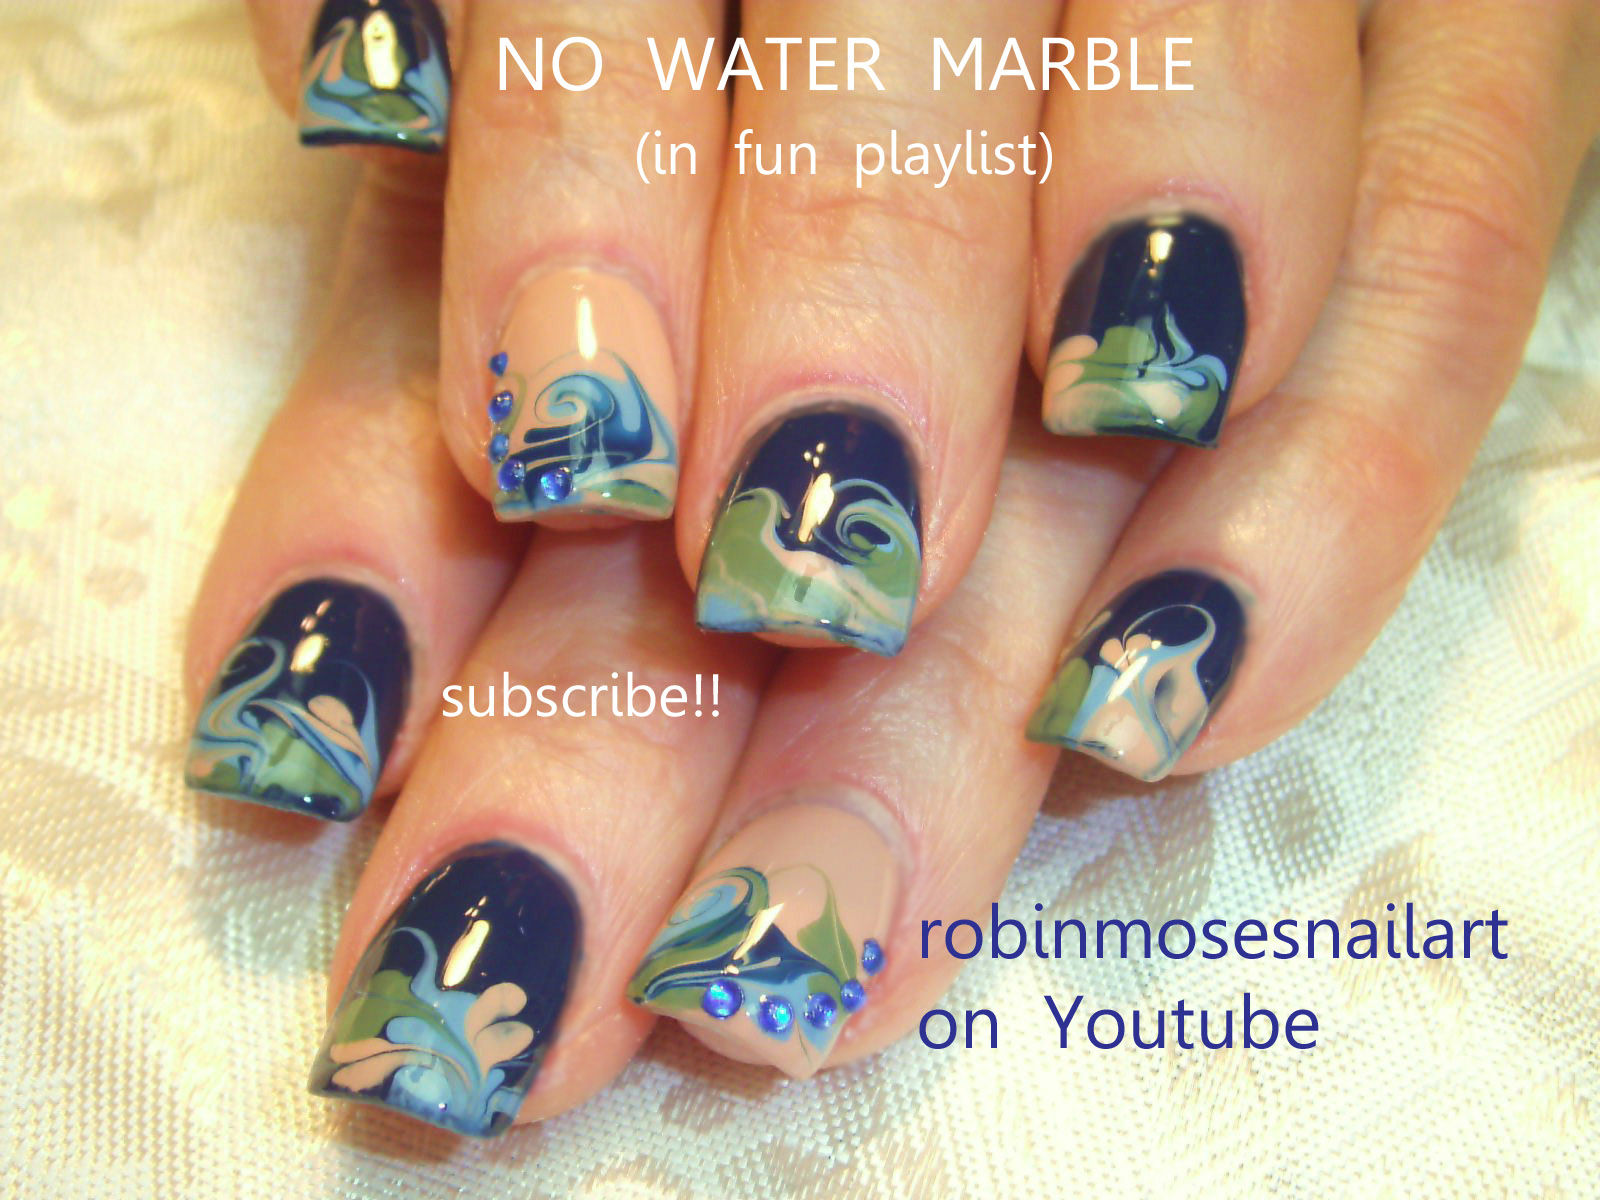 No Water Marble Nail Art Tutorial with Nail Vinyls - wide 6